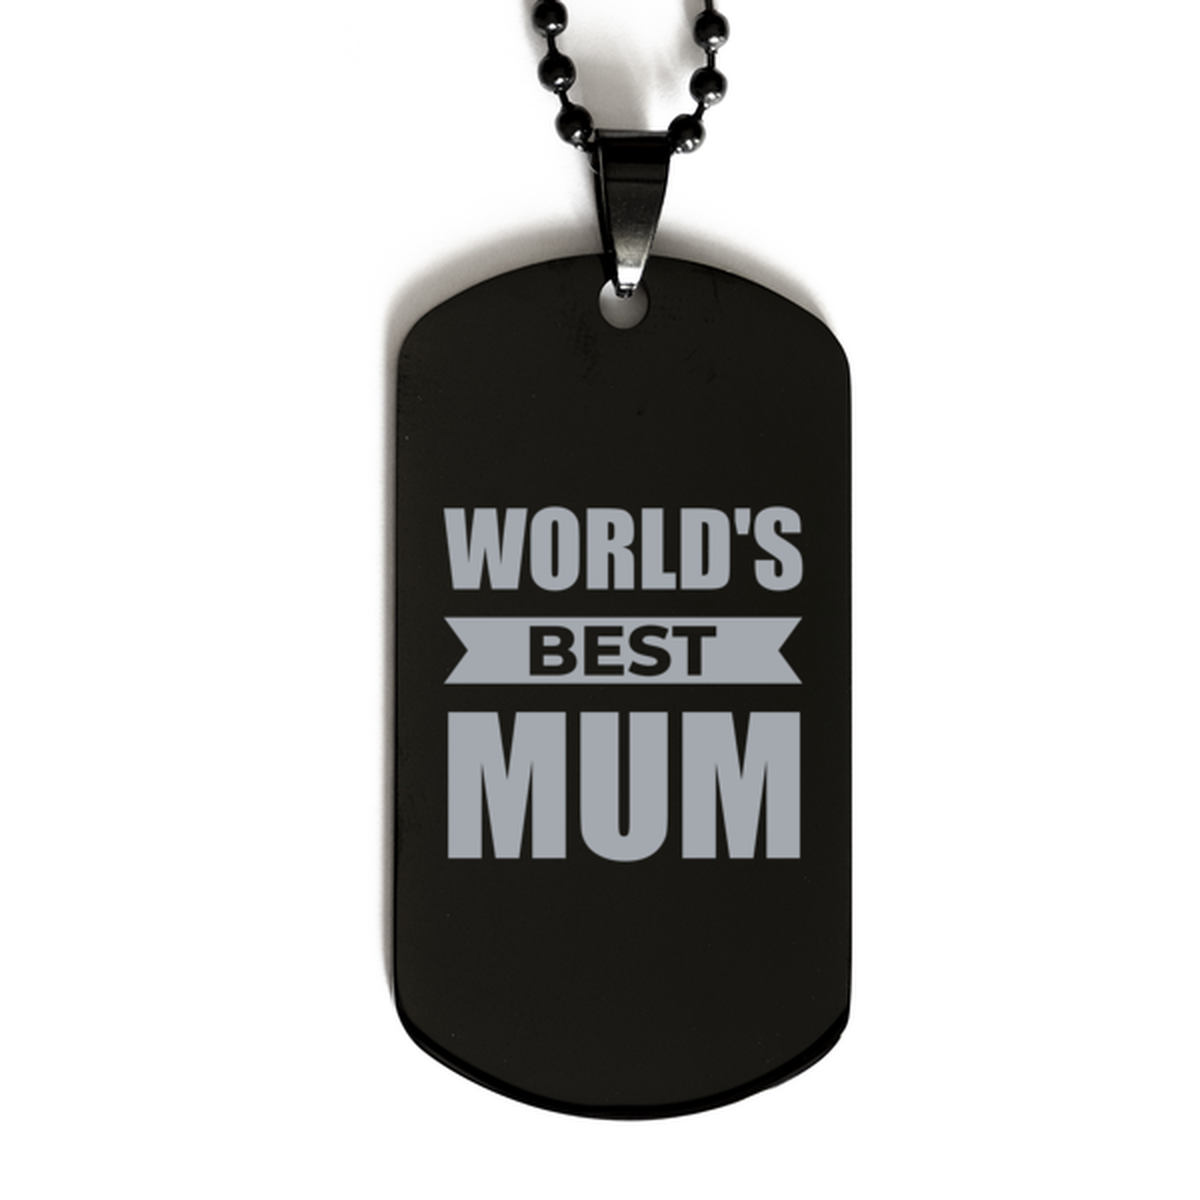 Worlds Best Mum Gifts, Funny Black Engraved Dog Tag For Mum, Birthday Presents For Women